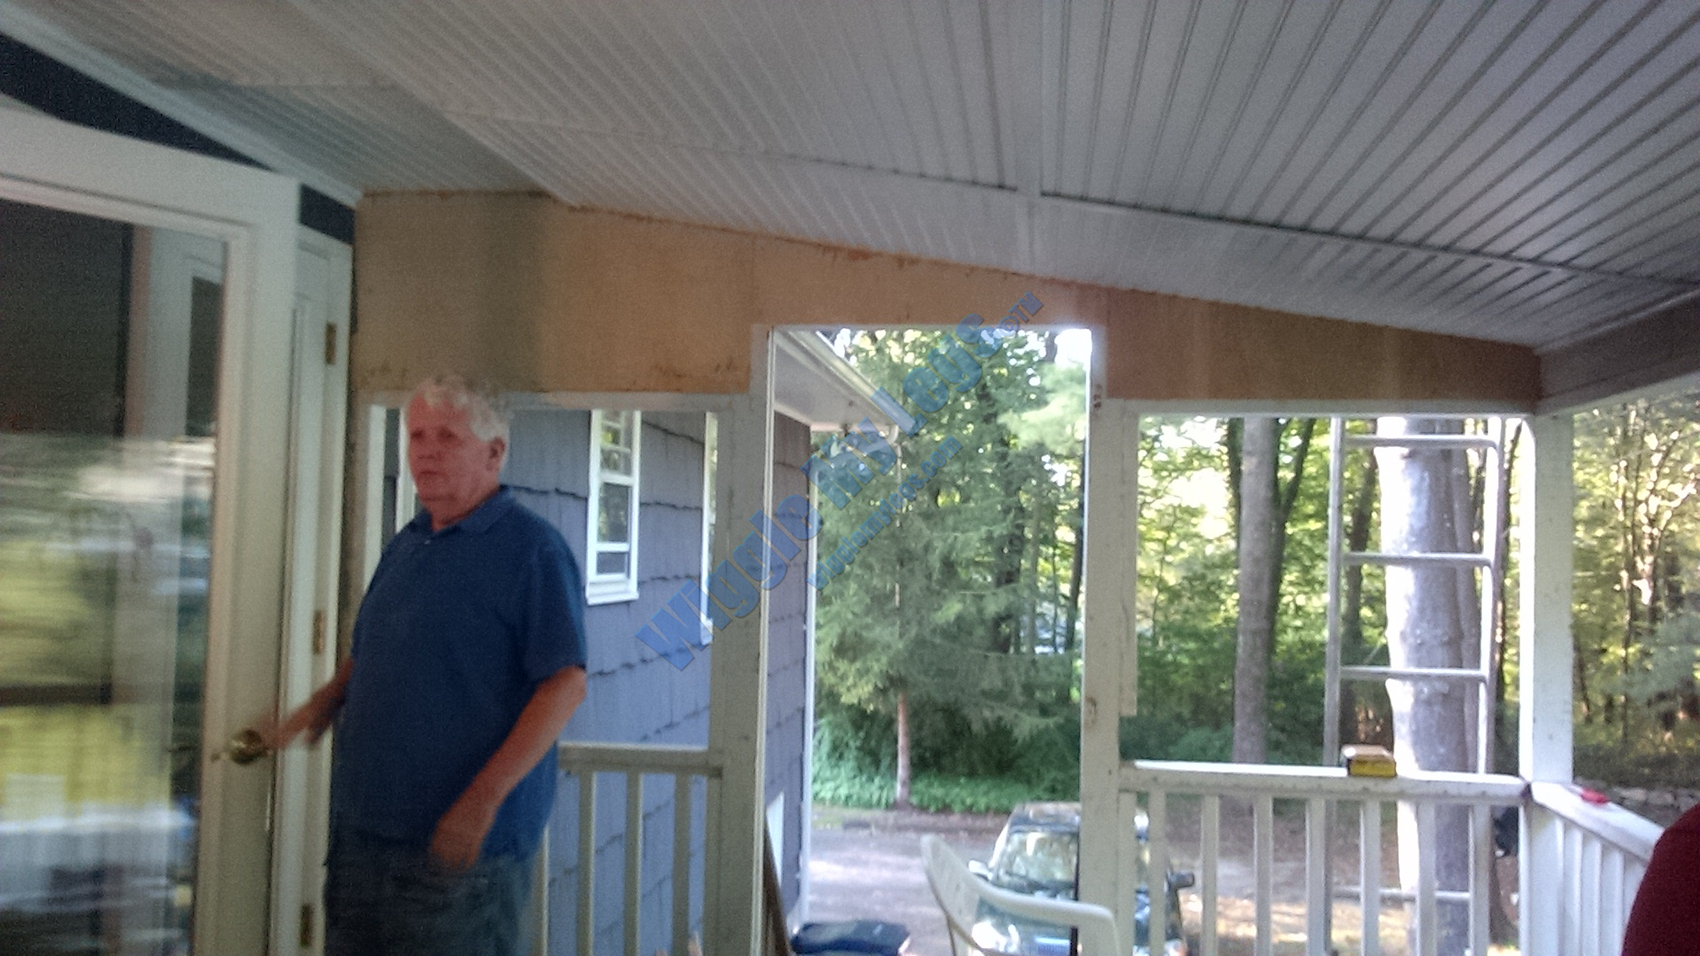 That end of interior gable area complete with plywood panels, and home owner cameo.